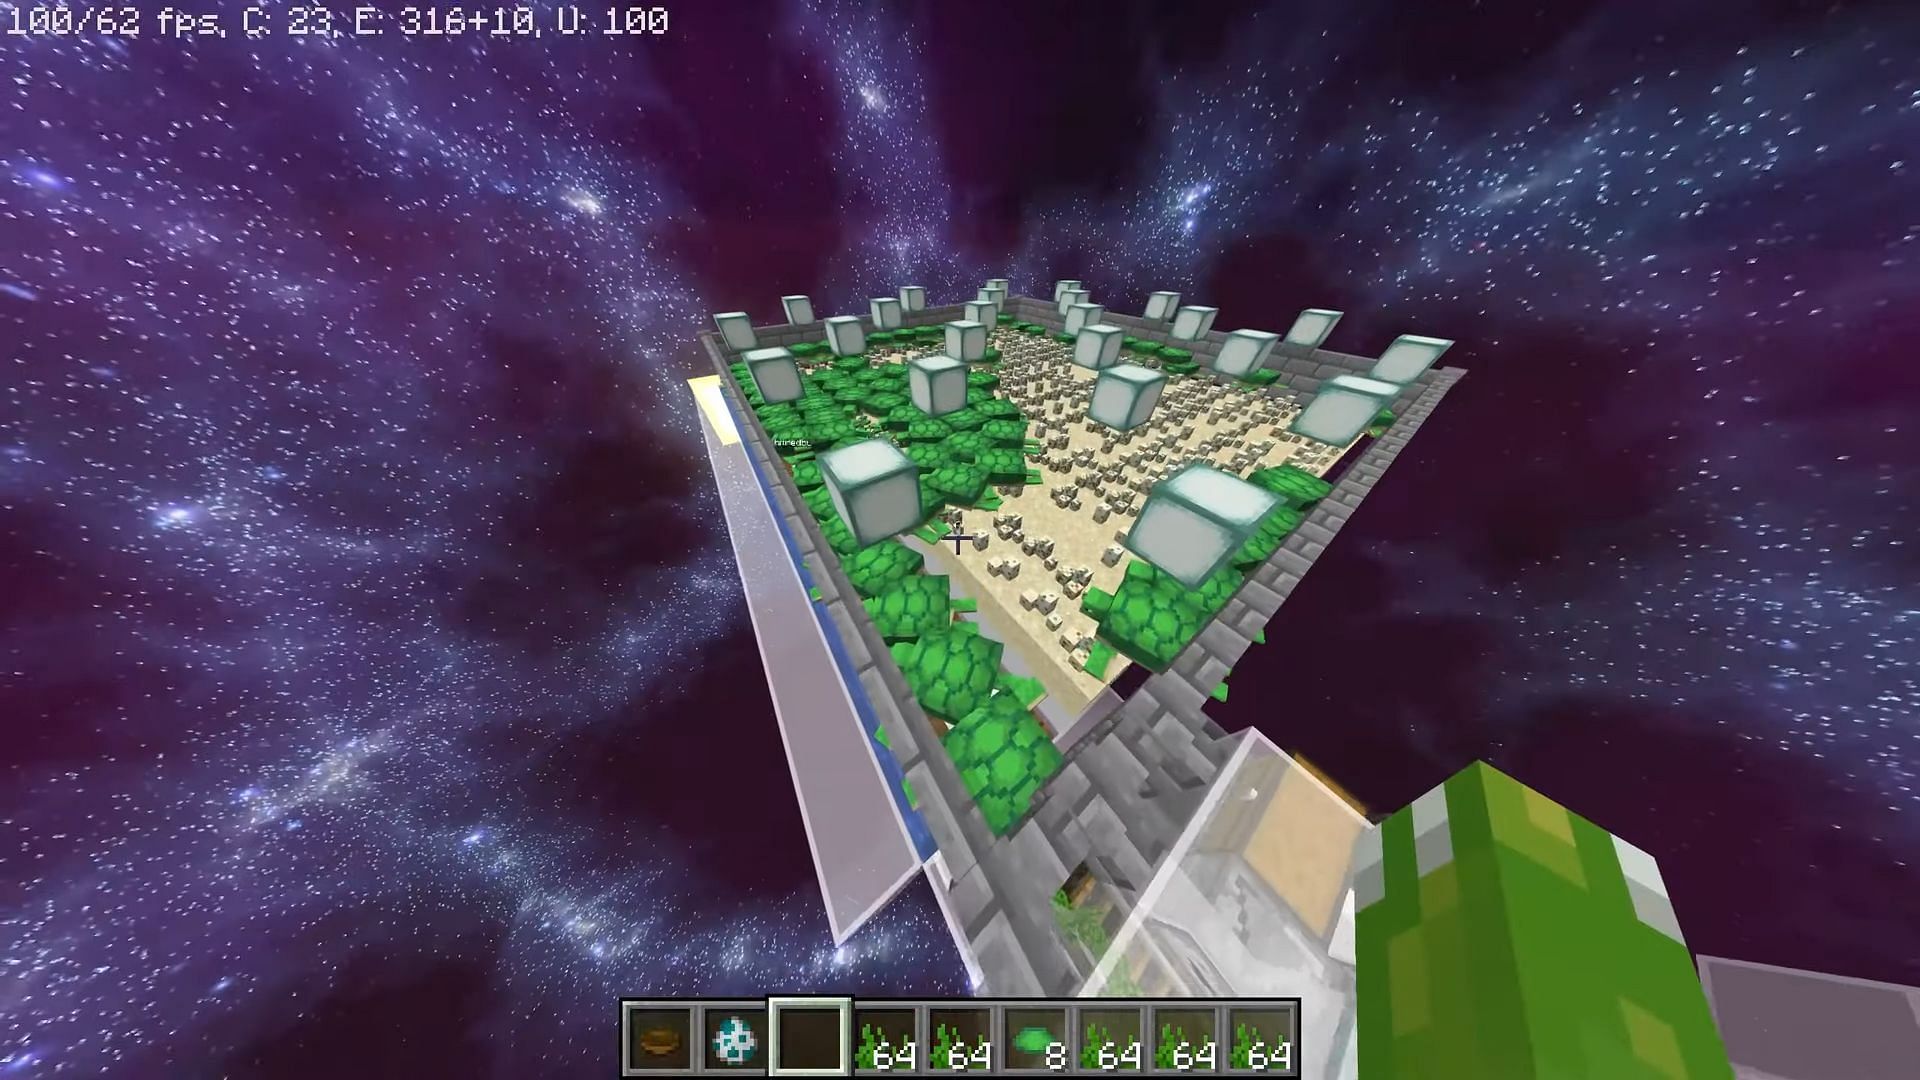 Bowls can technically be farmed in Minecraft by utilizing turtles (Image via Ncolyer/YouTube)